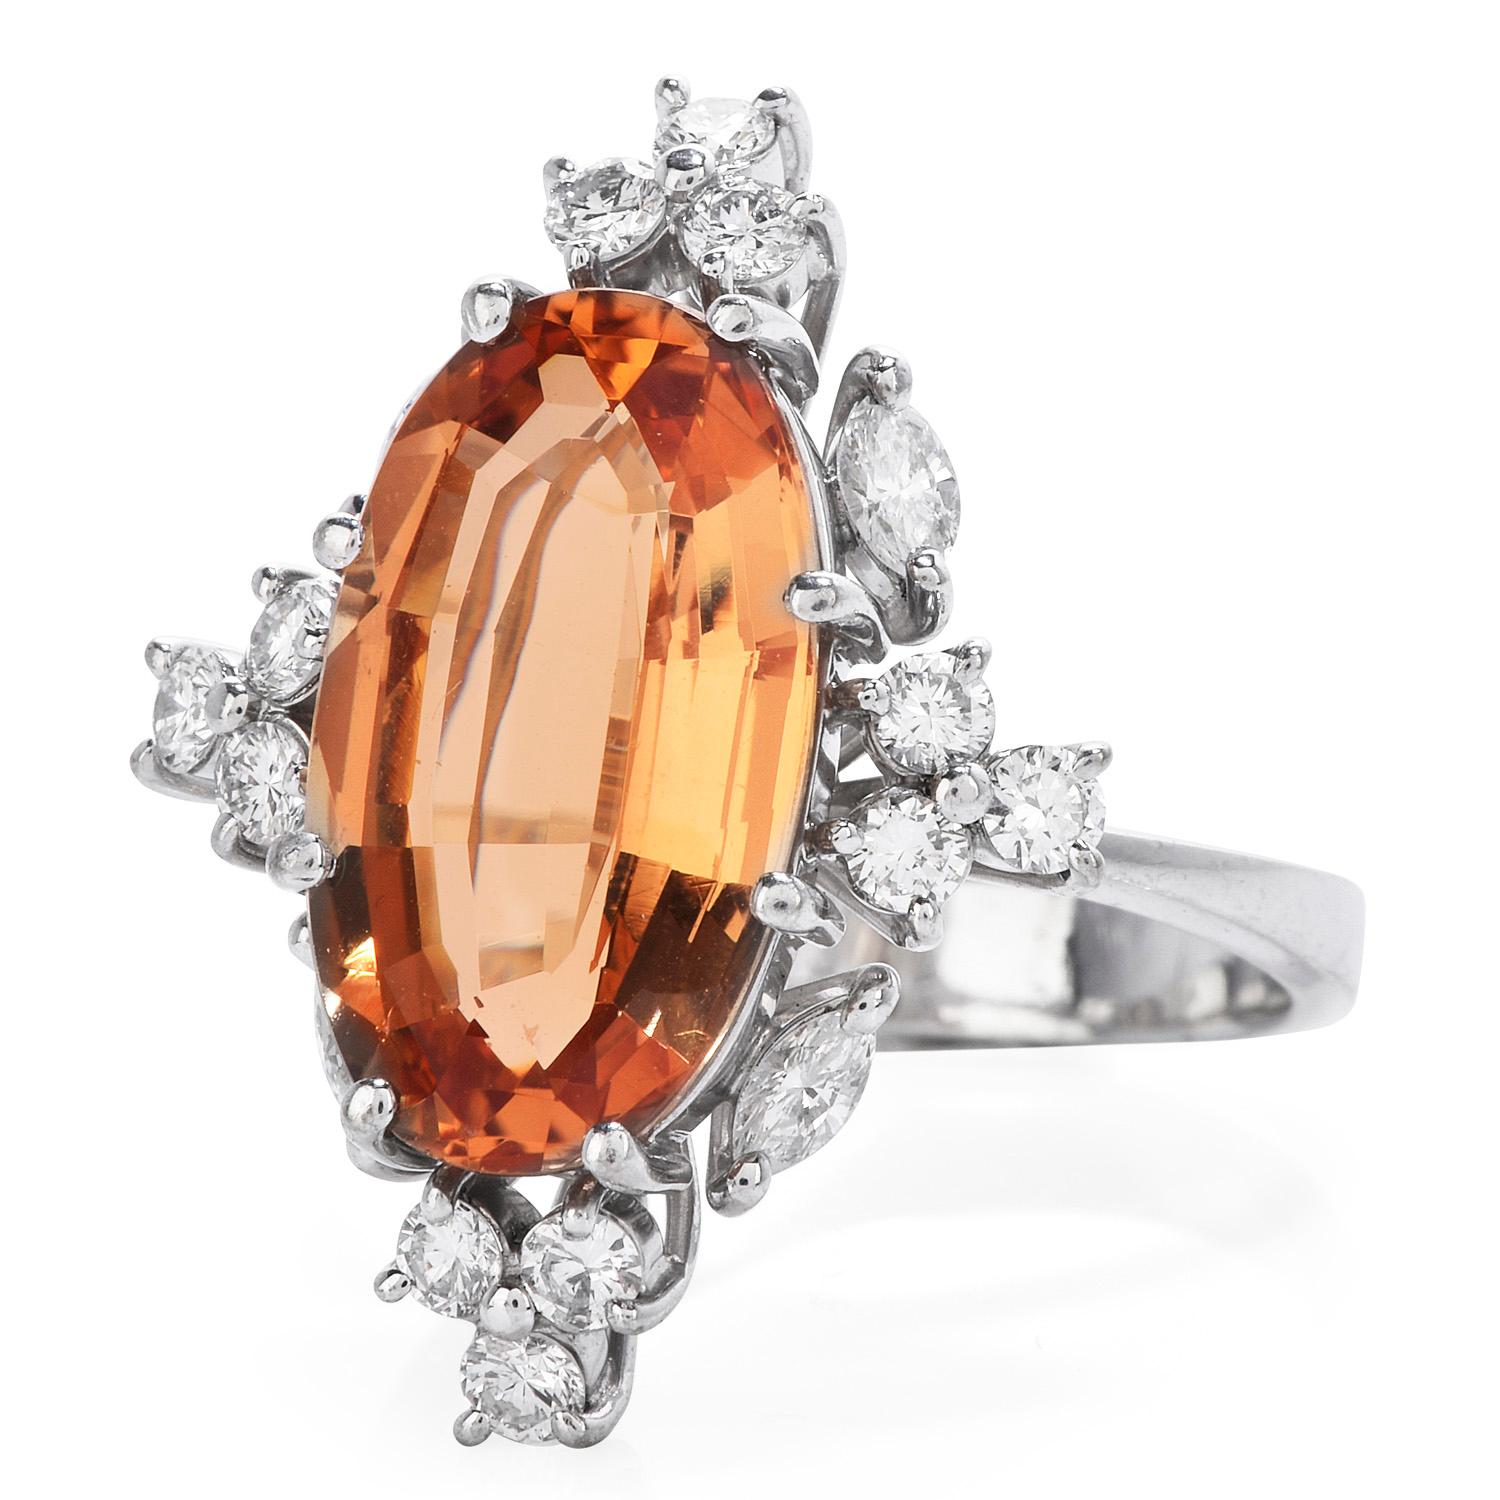 This Exquisite GIA Certified Yellowish Orange Imperial Topaz alludes to the color of the sundown 

Exuding femineity with its Victorian-inspired design, the Yellowish Orange Topaz weighs 5.80 carats.

Crafted on 18K white gold it is surrounded with